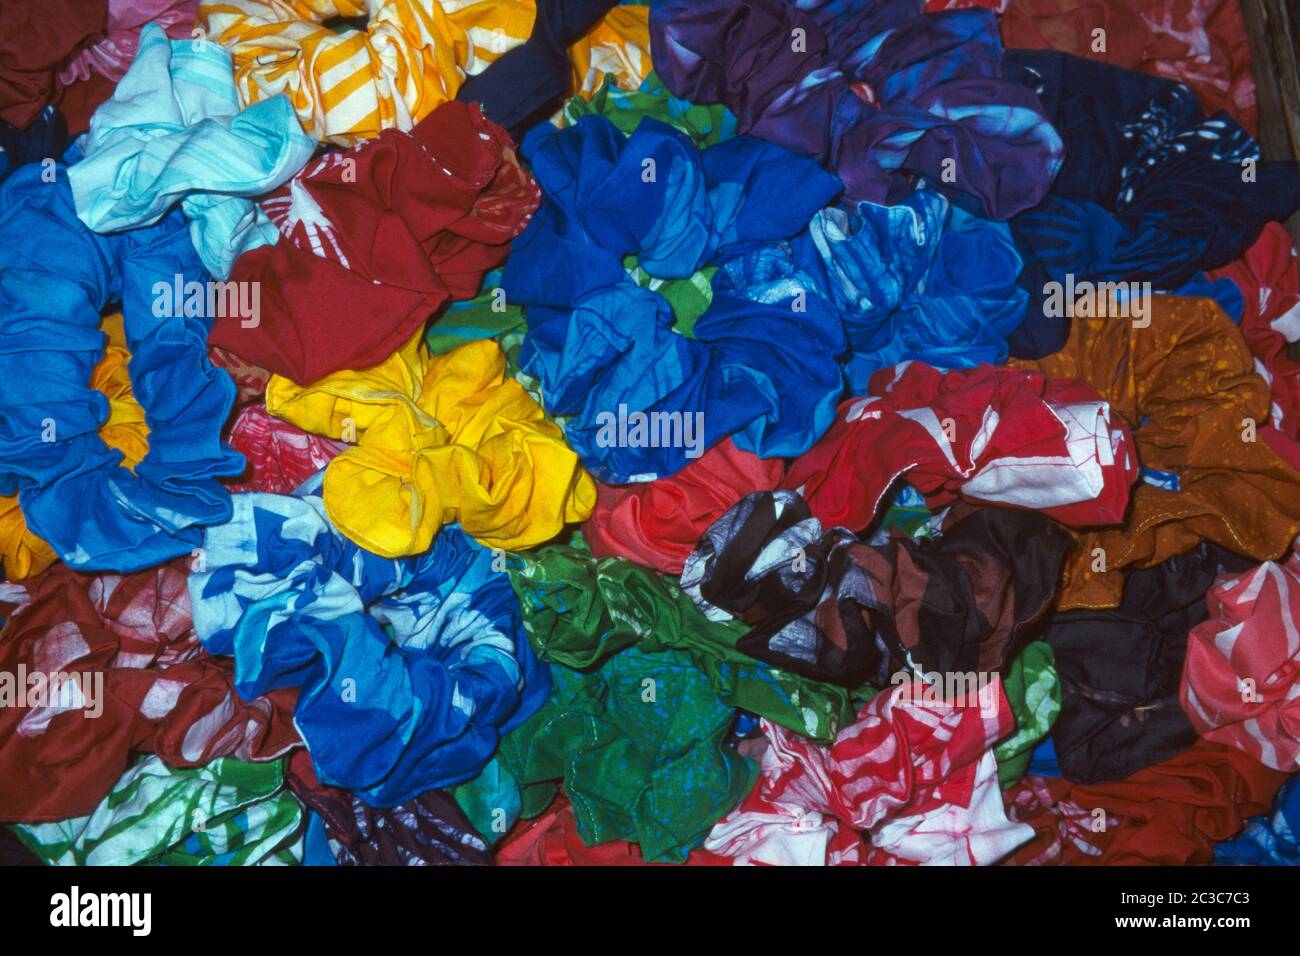 St Kitts A Collection of Colourful Scrunchy Hairbands Stock Photo